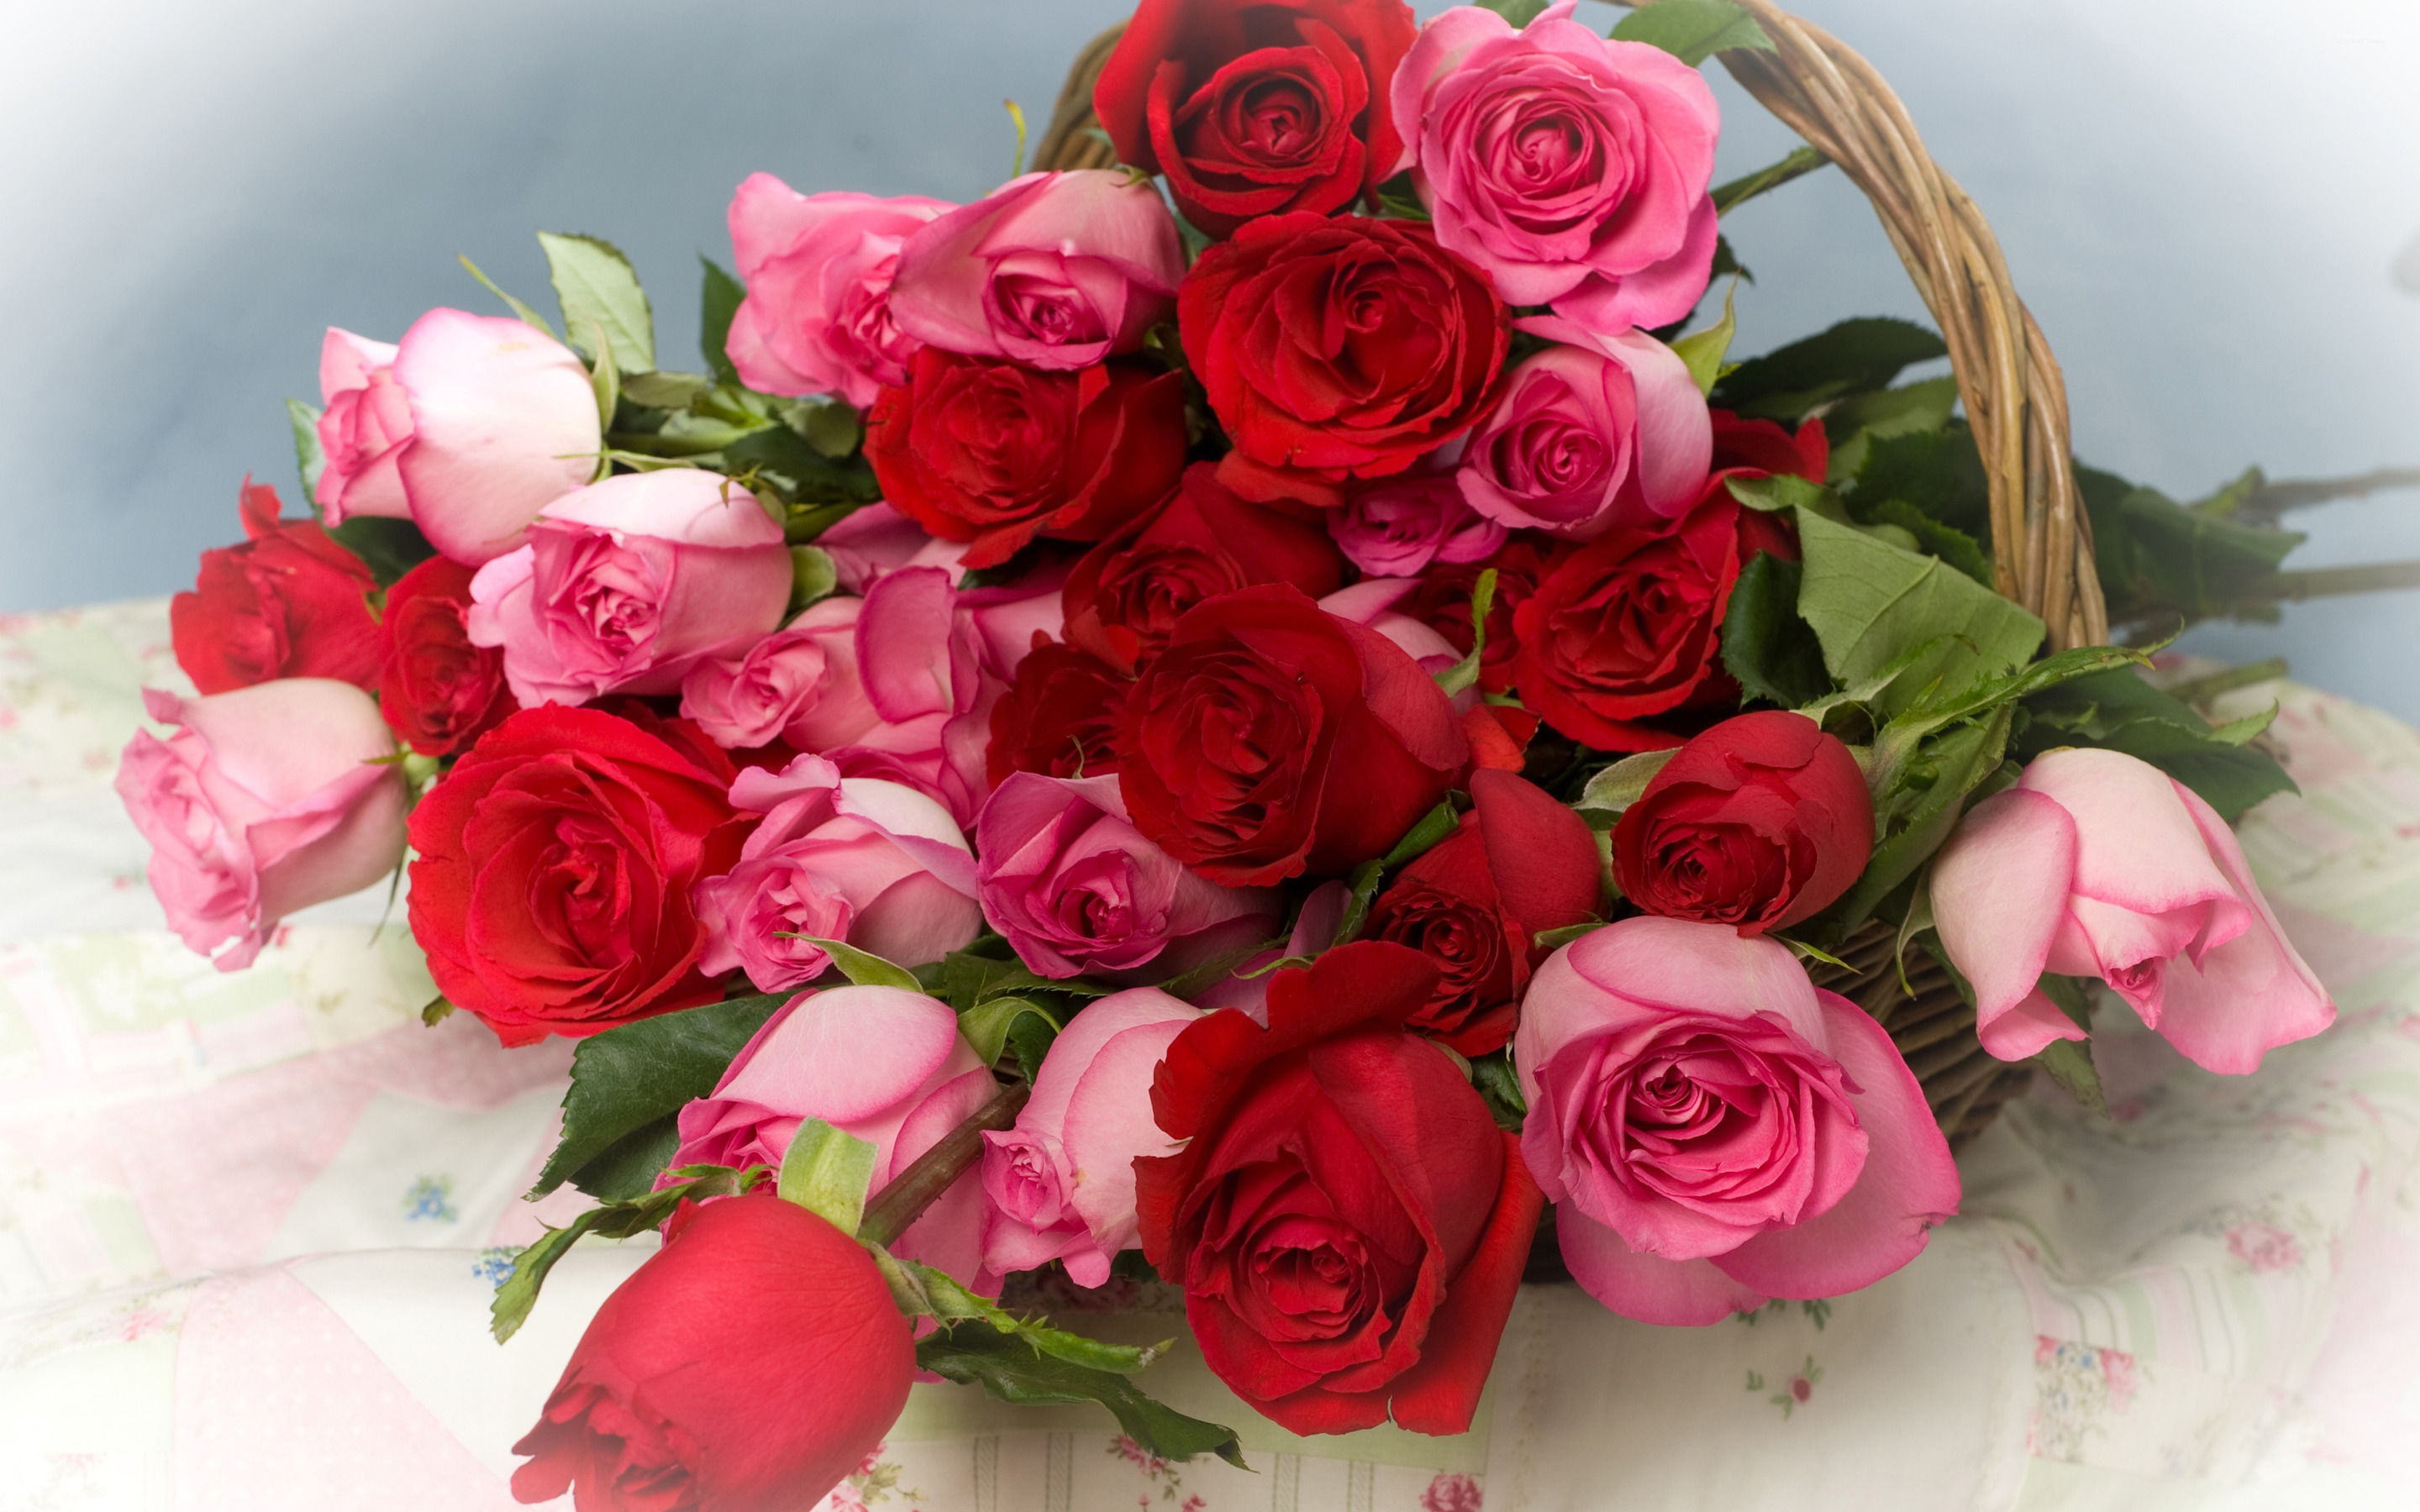 Pink And Red Roses In A Basket Wallpaper Flower